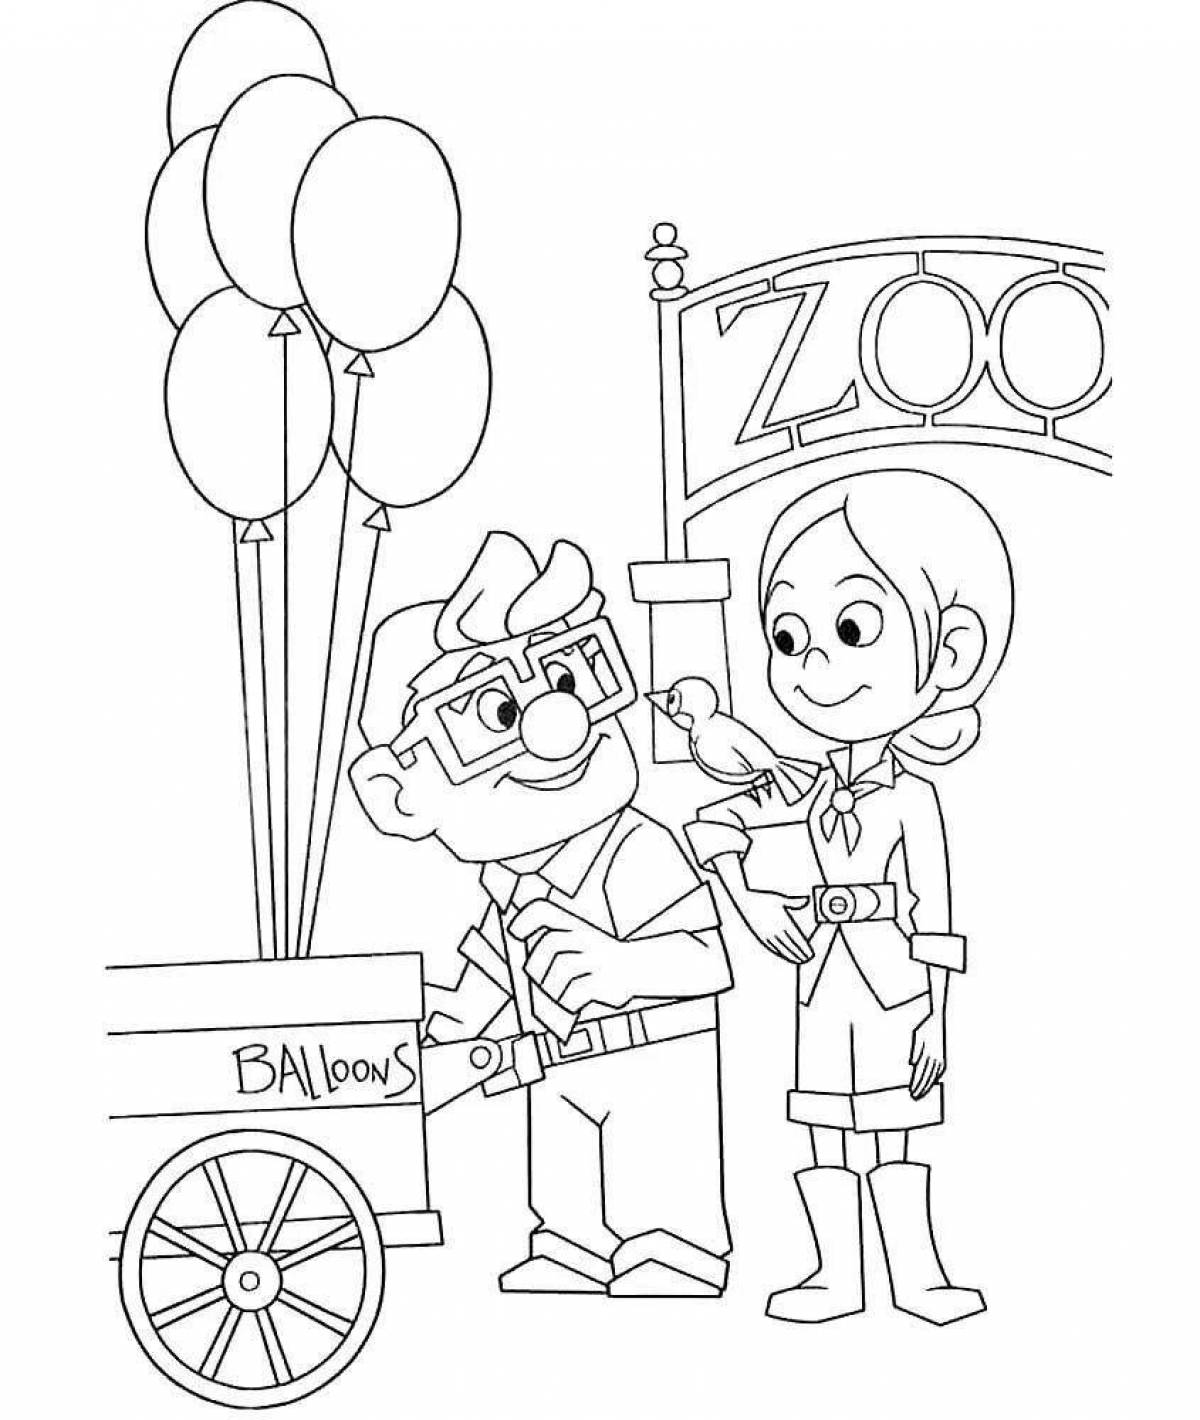 Fun coloring page up